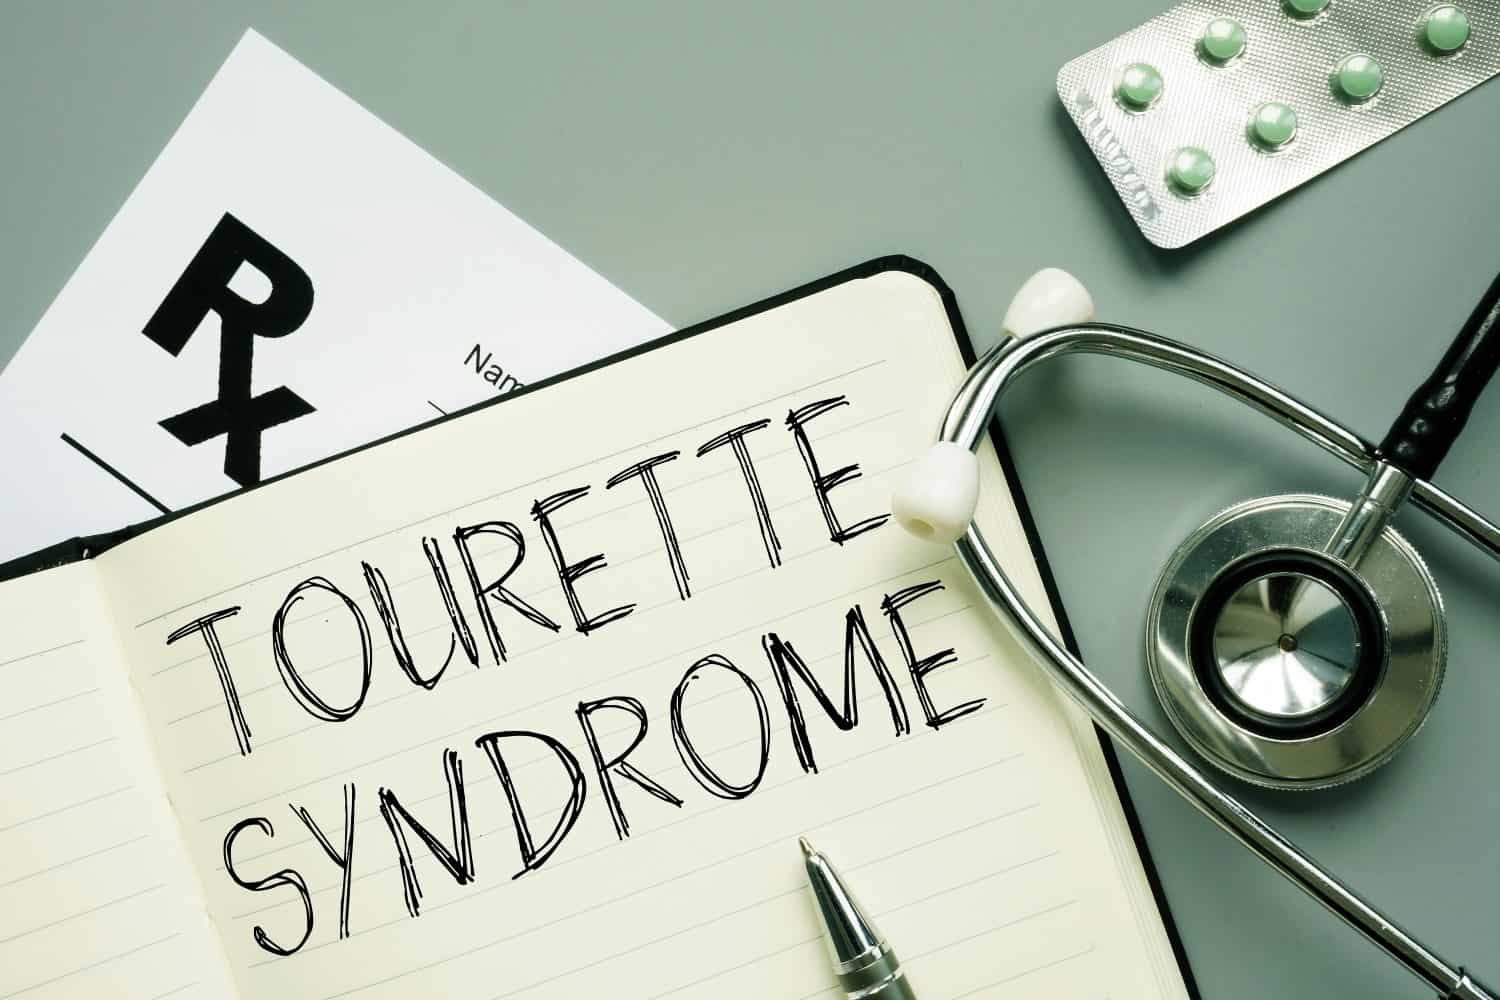 Tourette syndrome is shown using a text